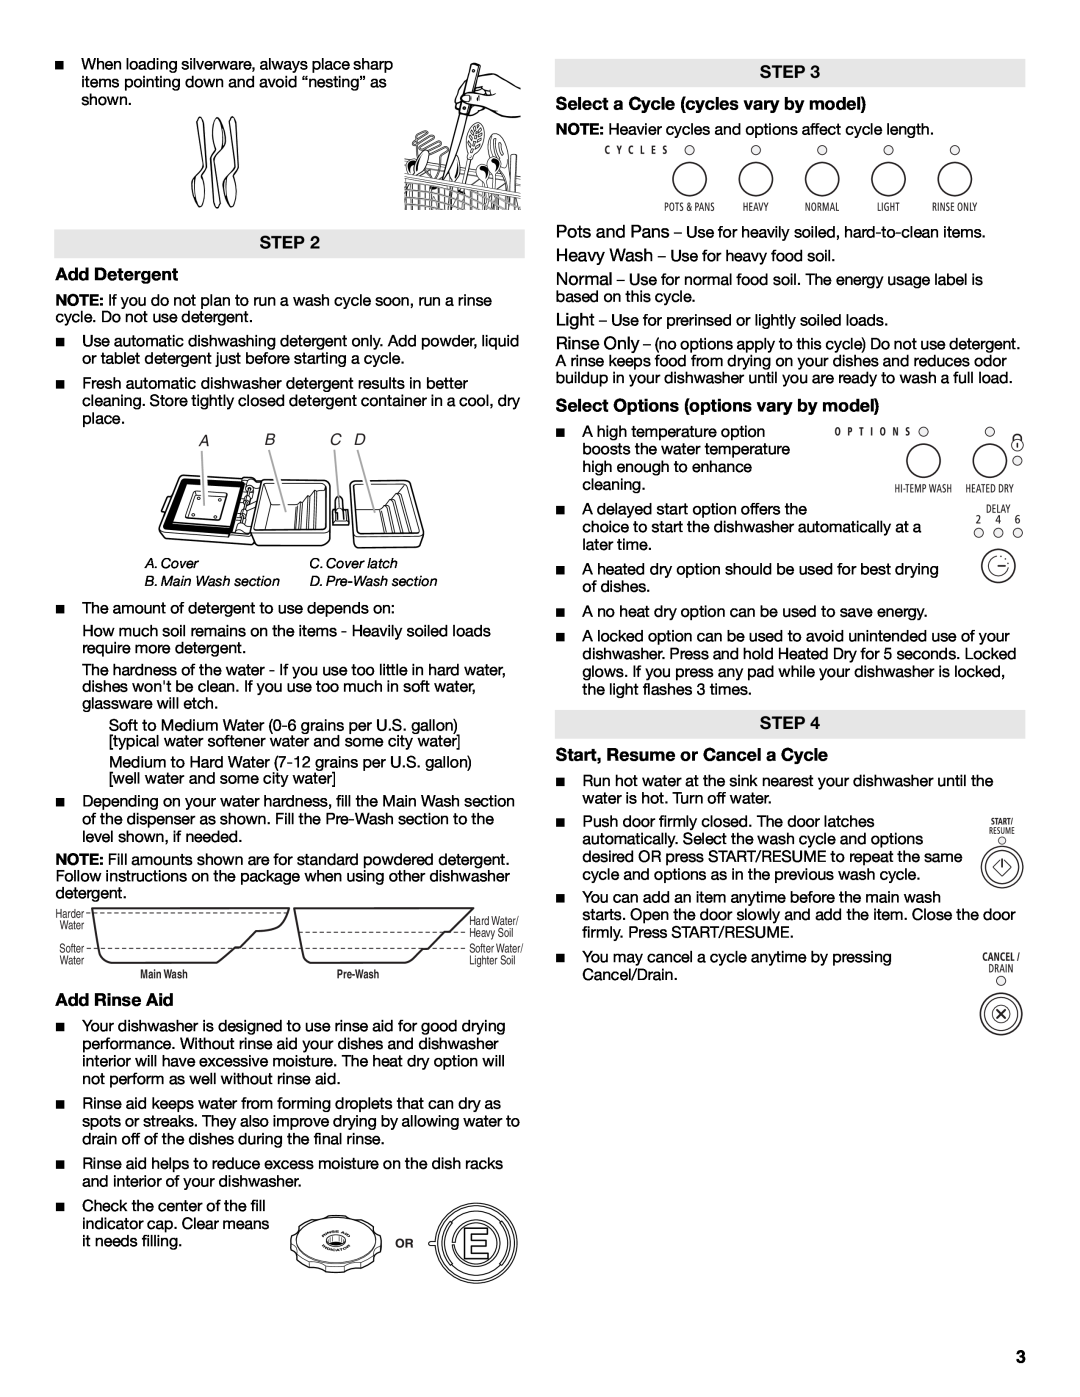 Whirlpool W10130985A STEP Add Detergent, Add Rinse Aid, STEP Select a Cycle cycles vary by model, A B C D 